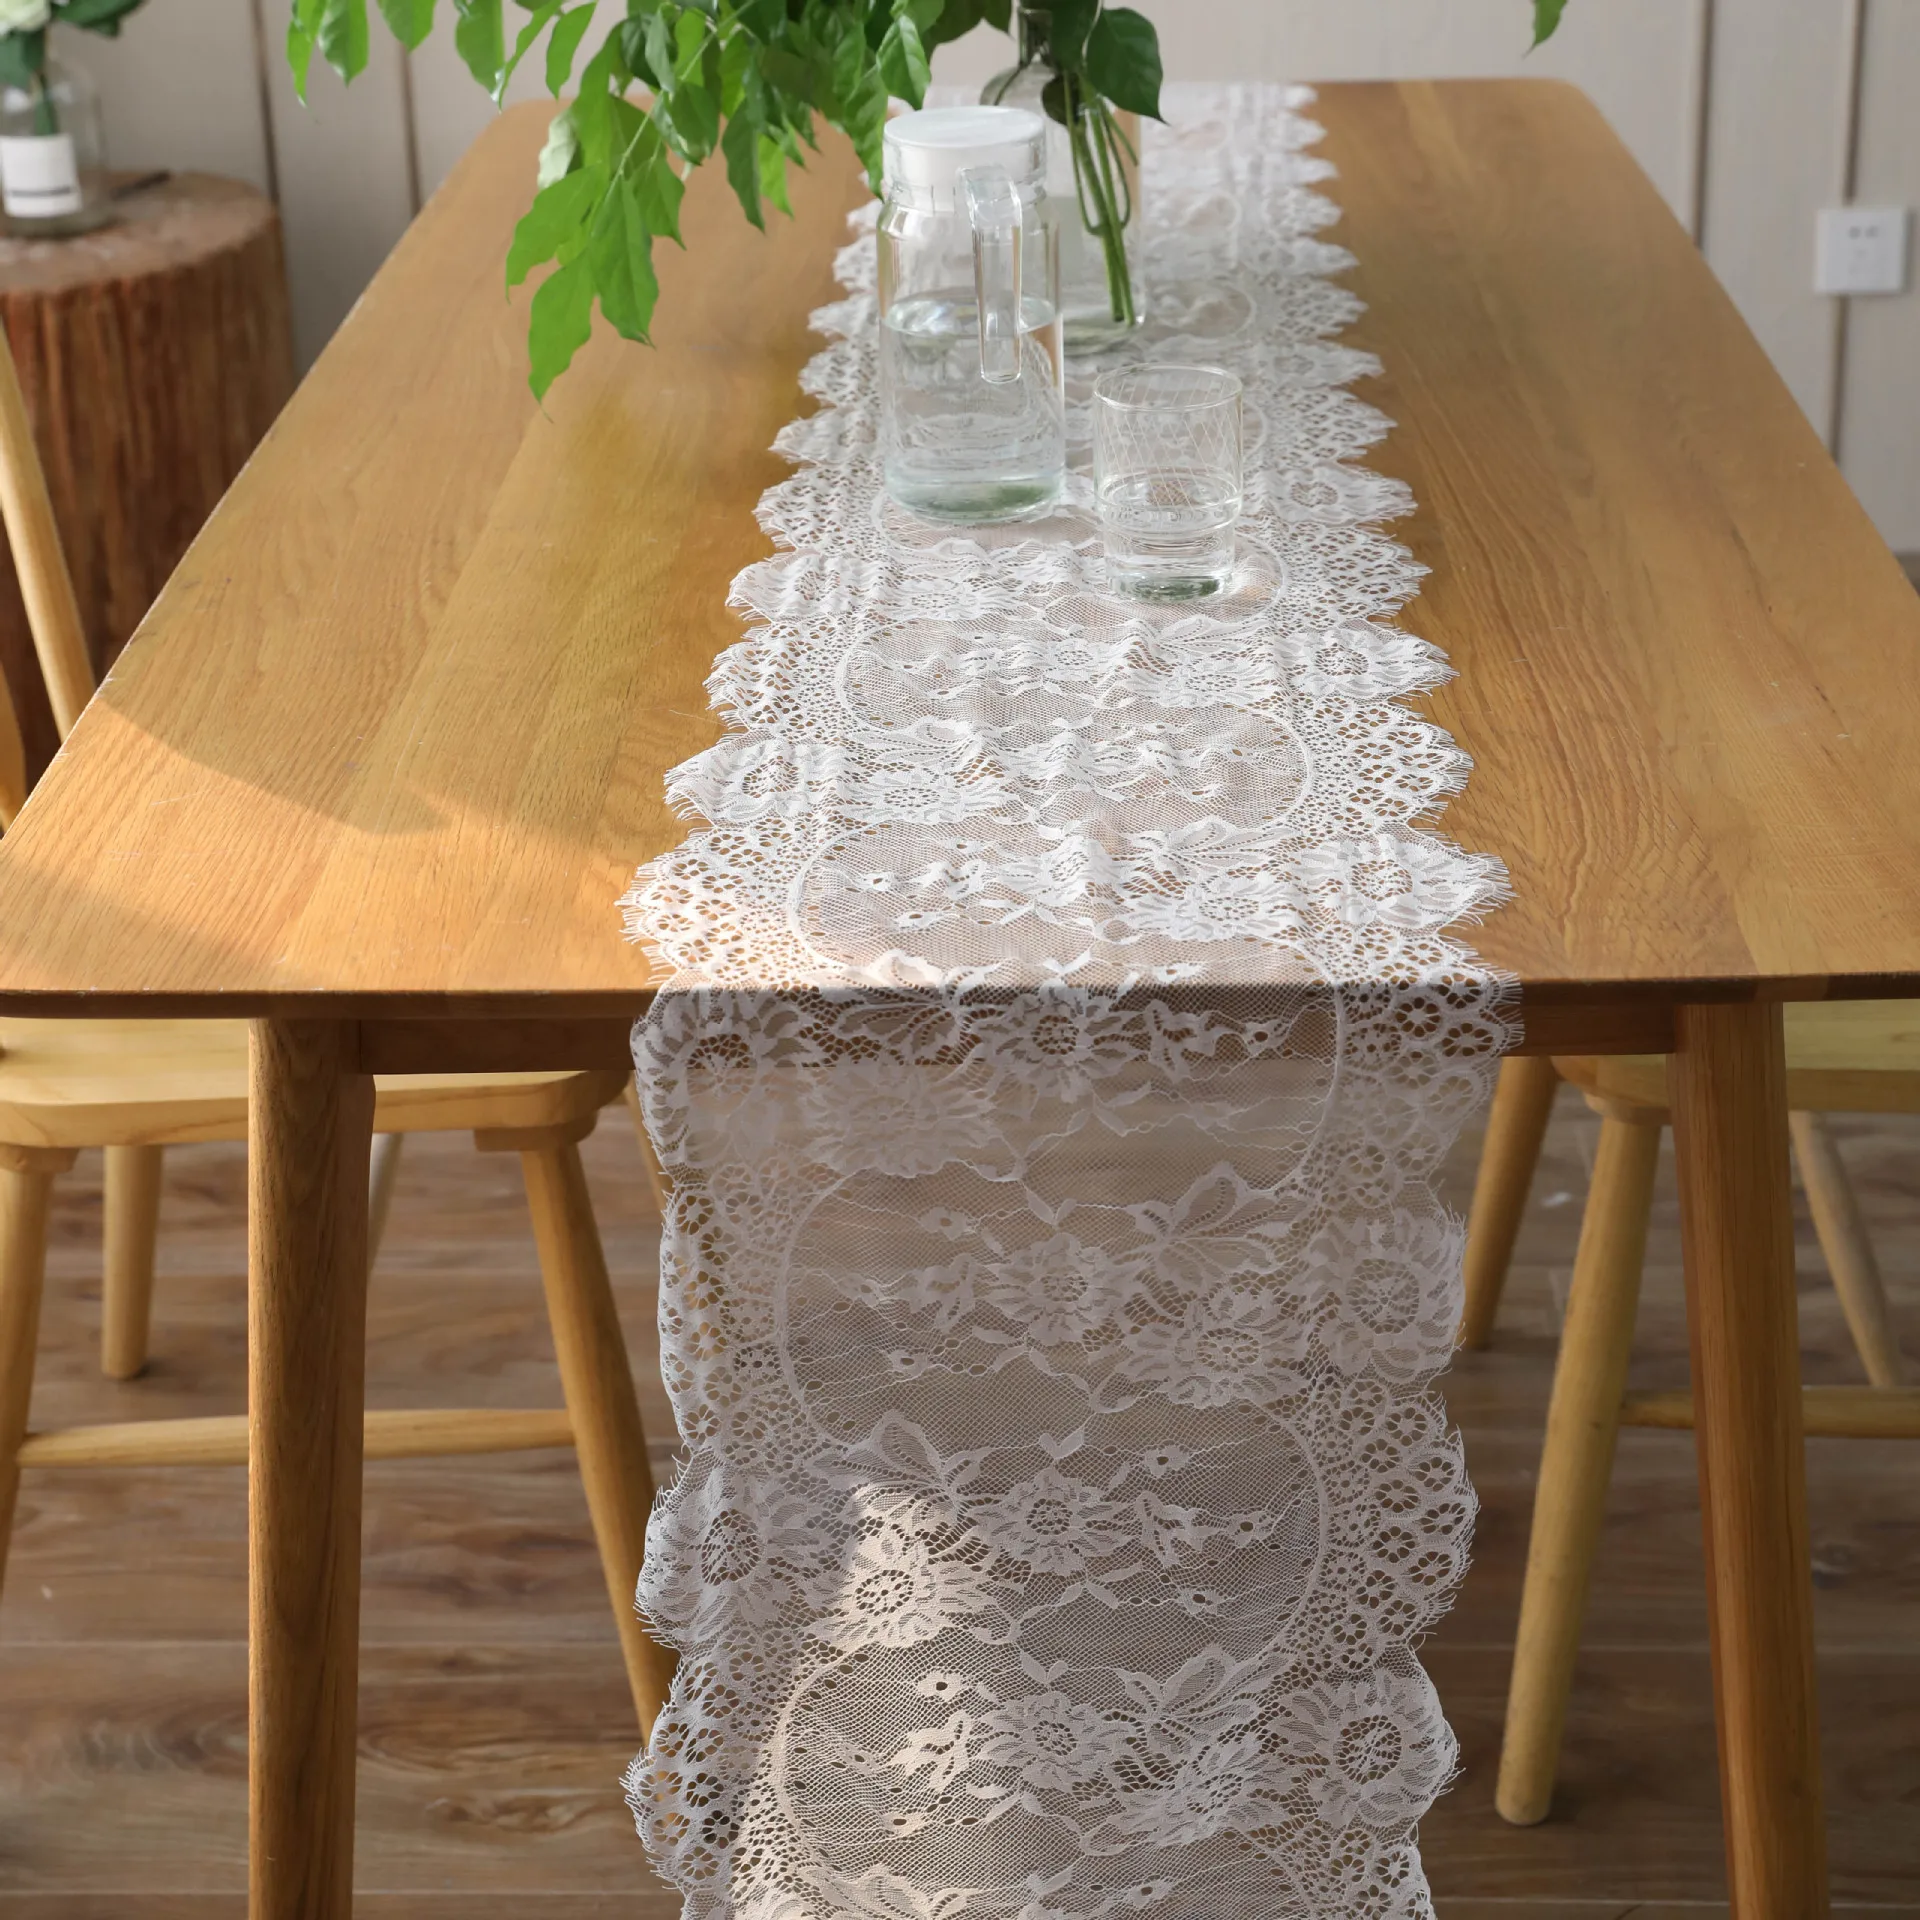 

35x300cm European-Style Table Runner Chair Yarn White Eyelashes Outdoor Home Decoration Lace Wedding Christmas Party Tablecloth